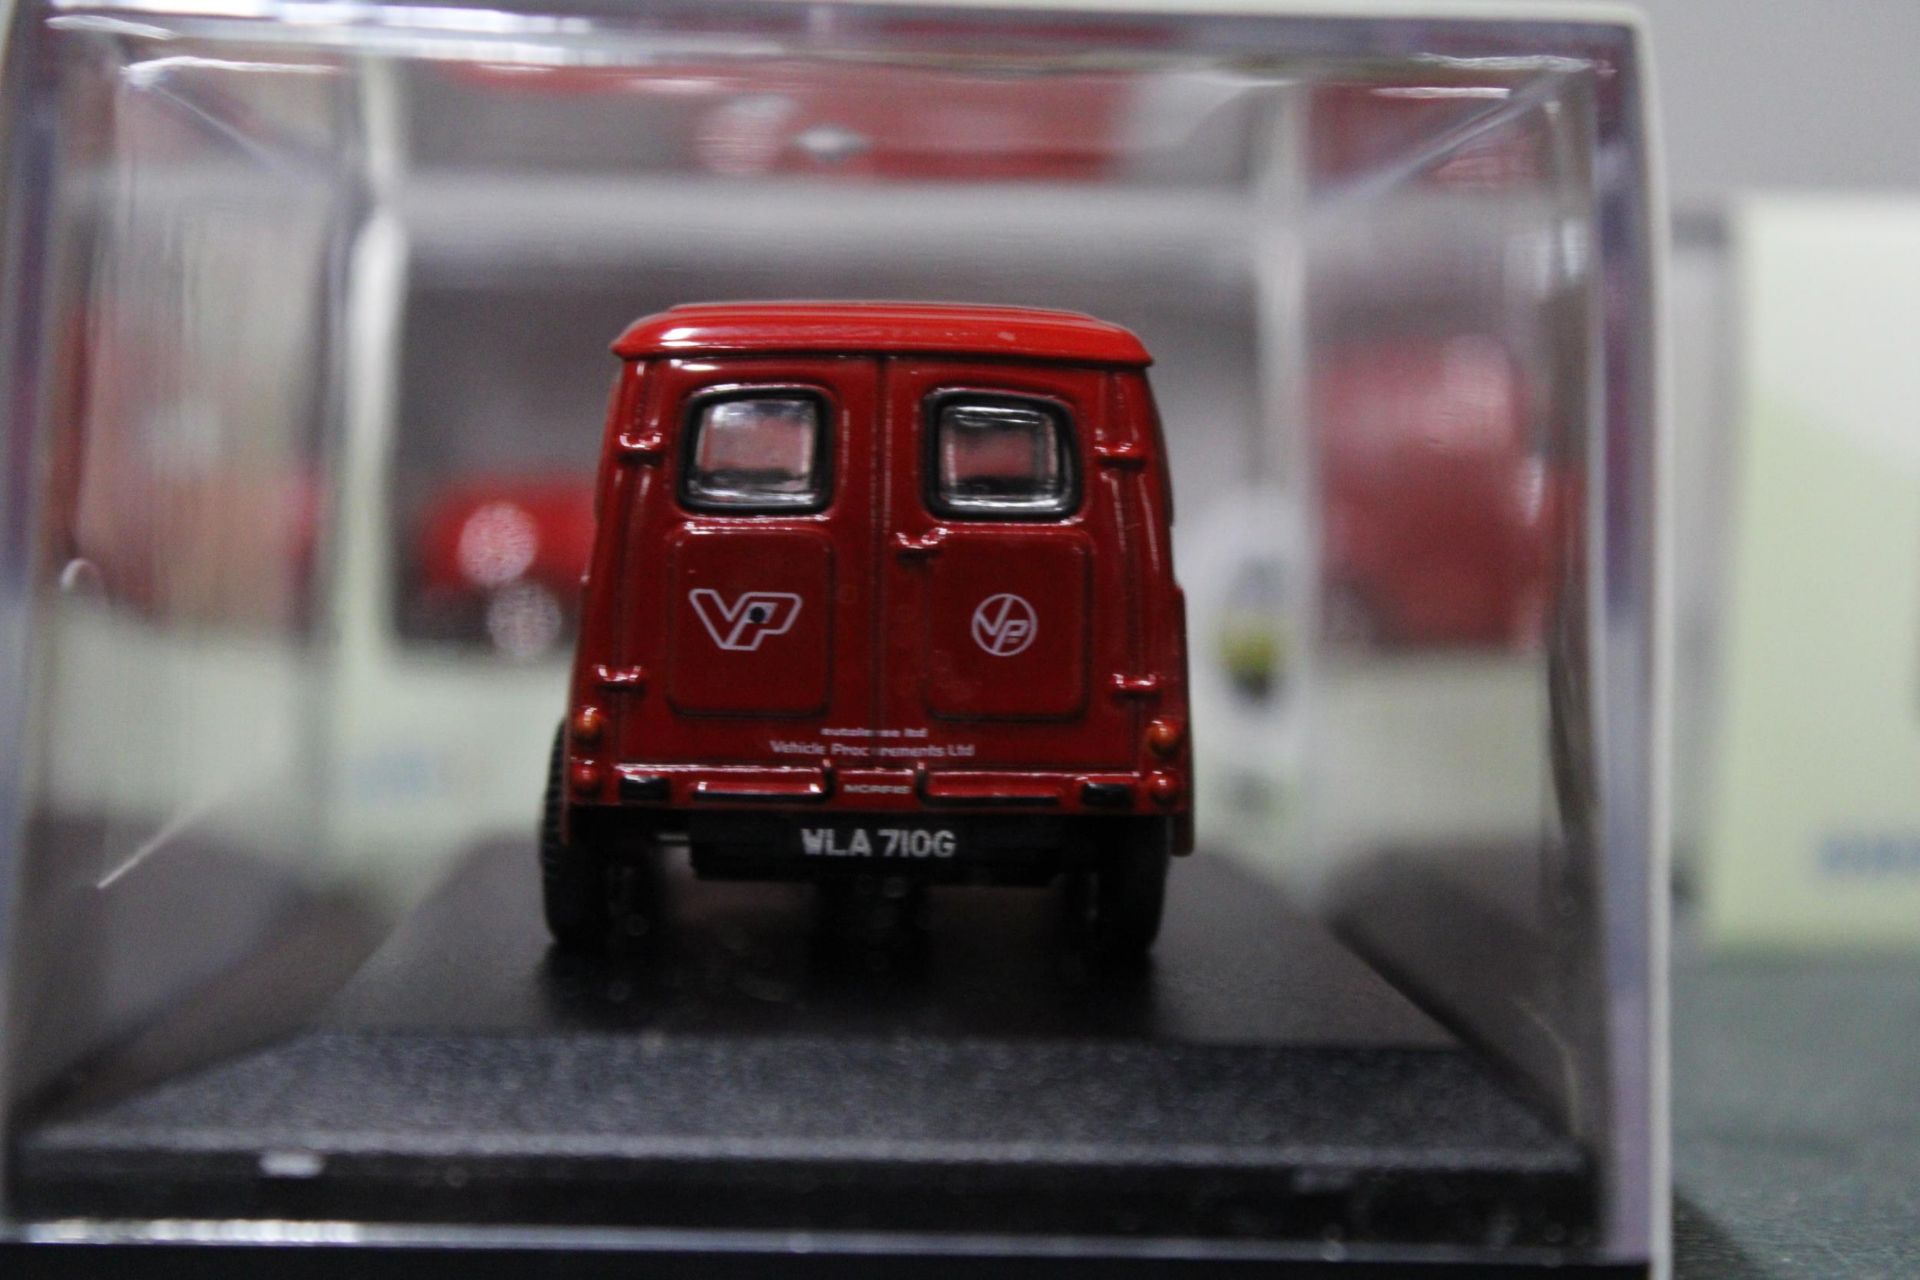 SIX OXFORD COMMERCIALS DIE-CAST VANS - AS NEW IN BOXES - Image 5 of 5